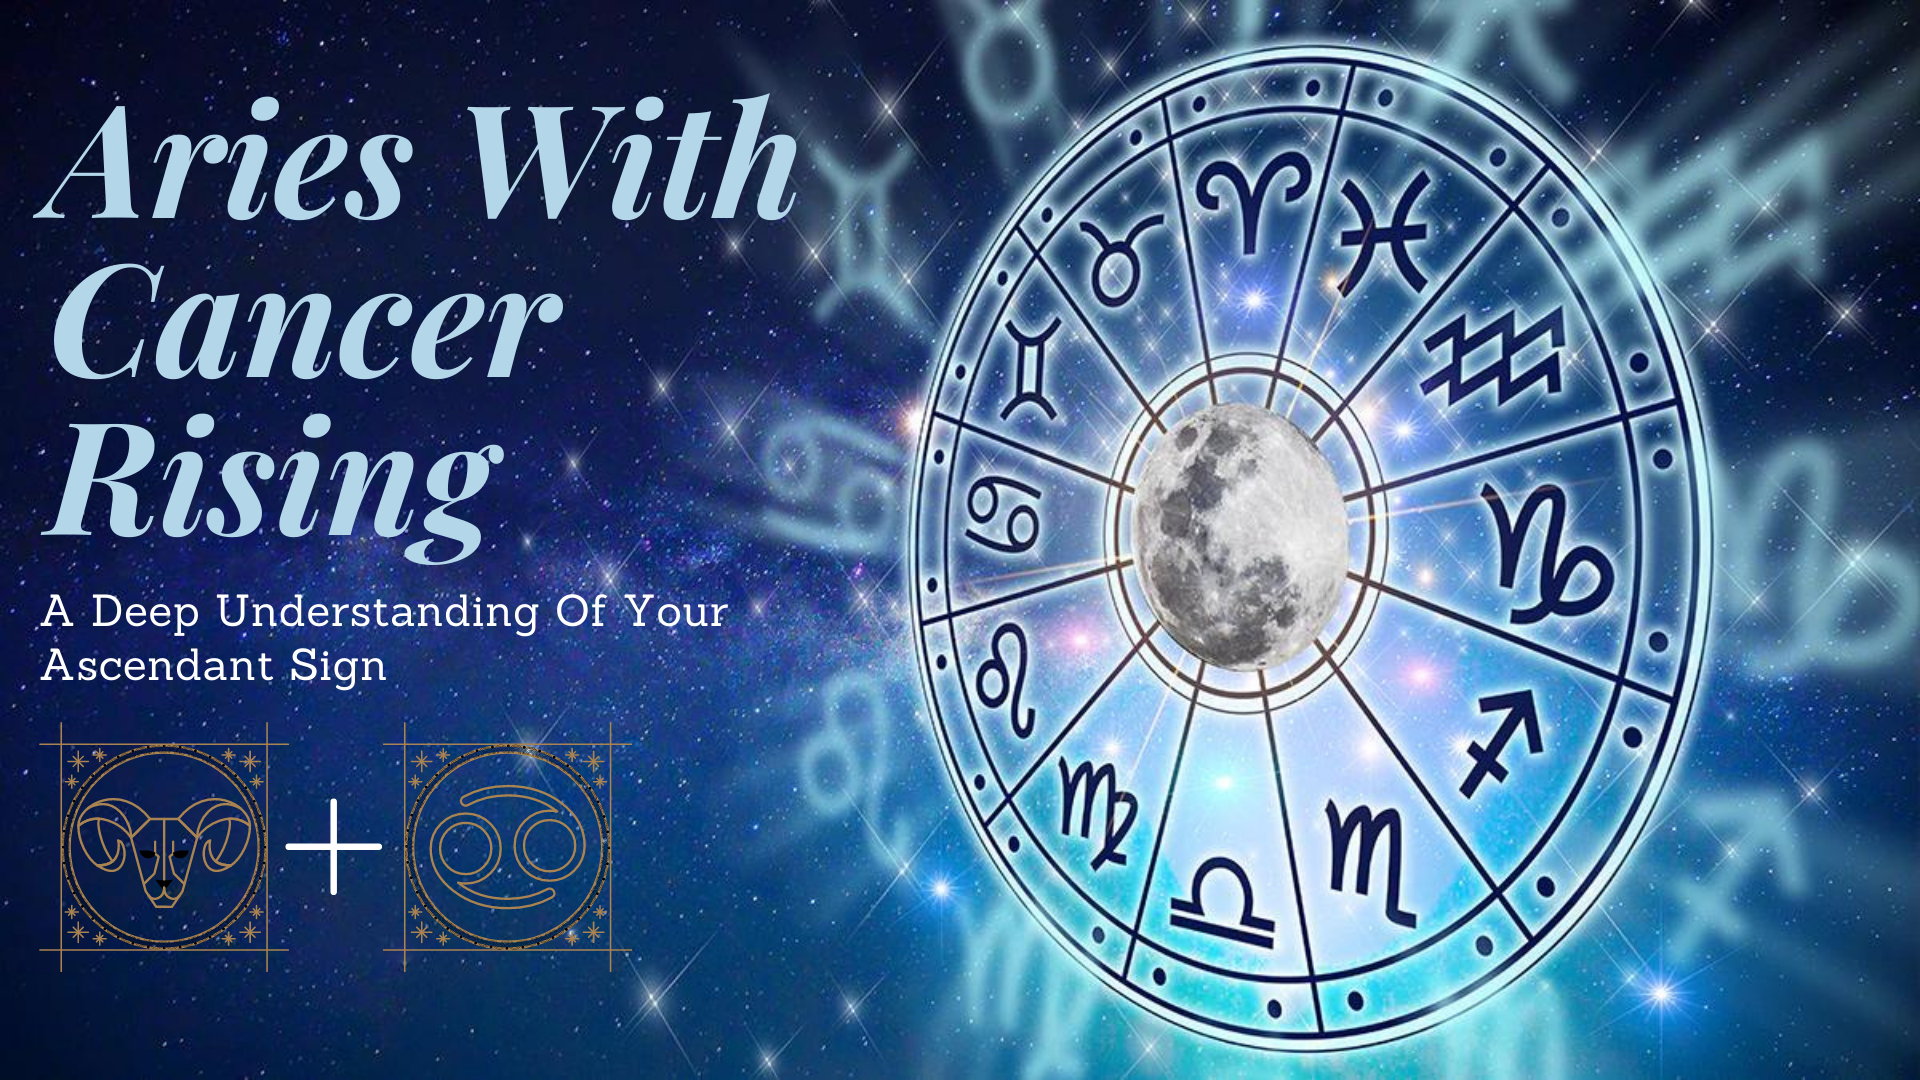 Aries With Cancer Rising - A Deep Understanding Of Your Ascendant Sign